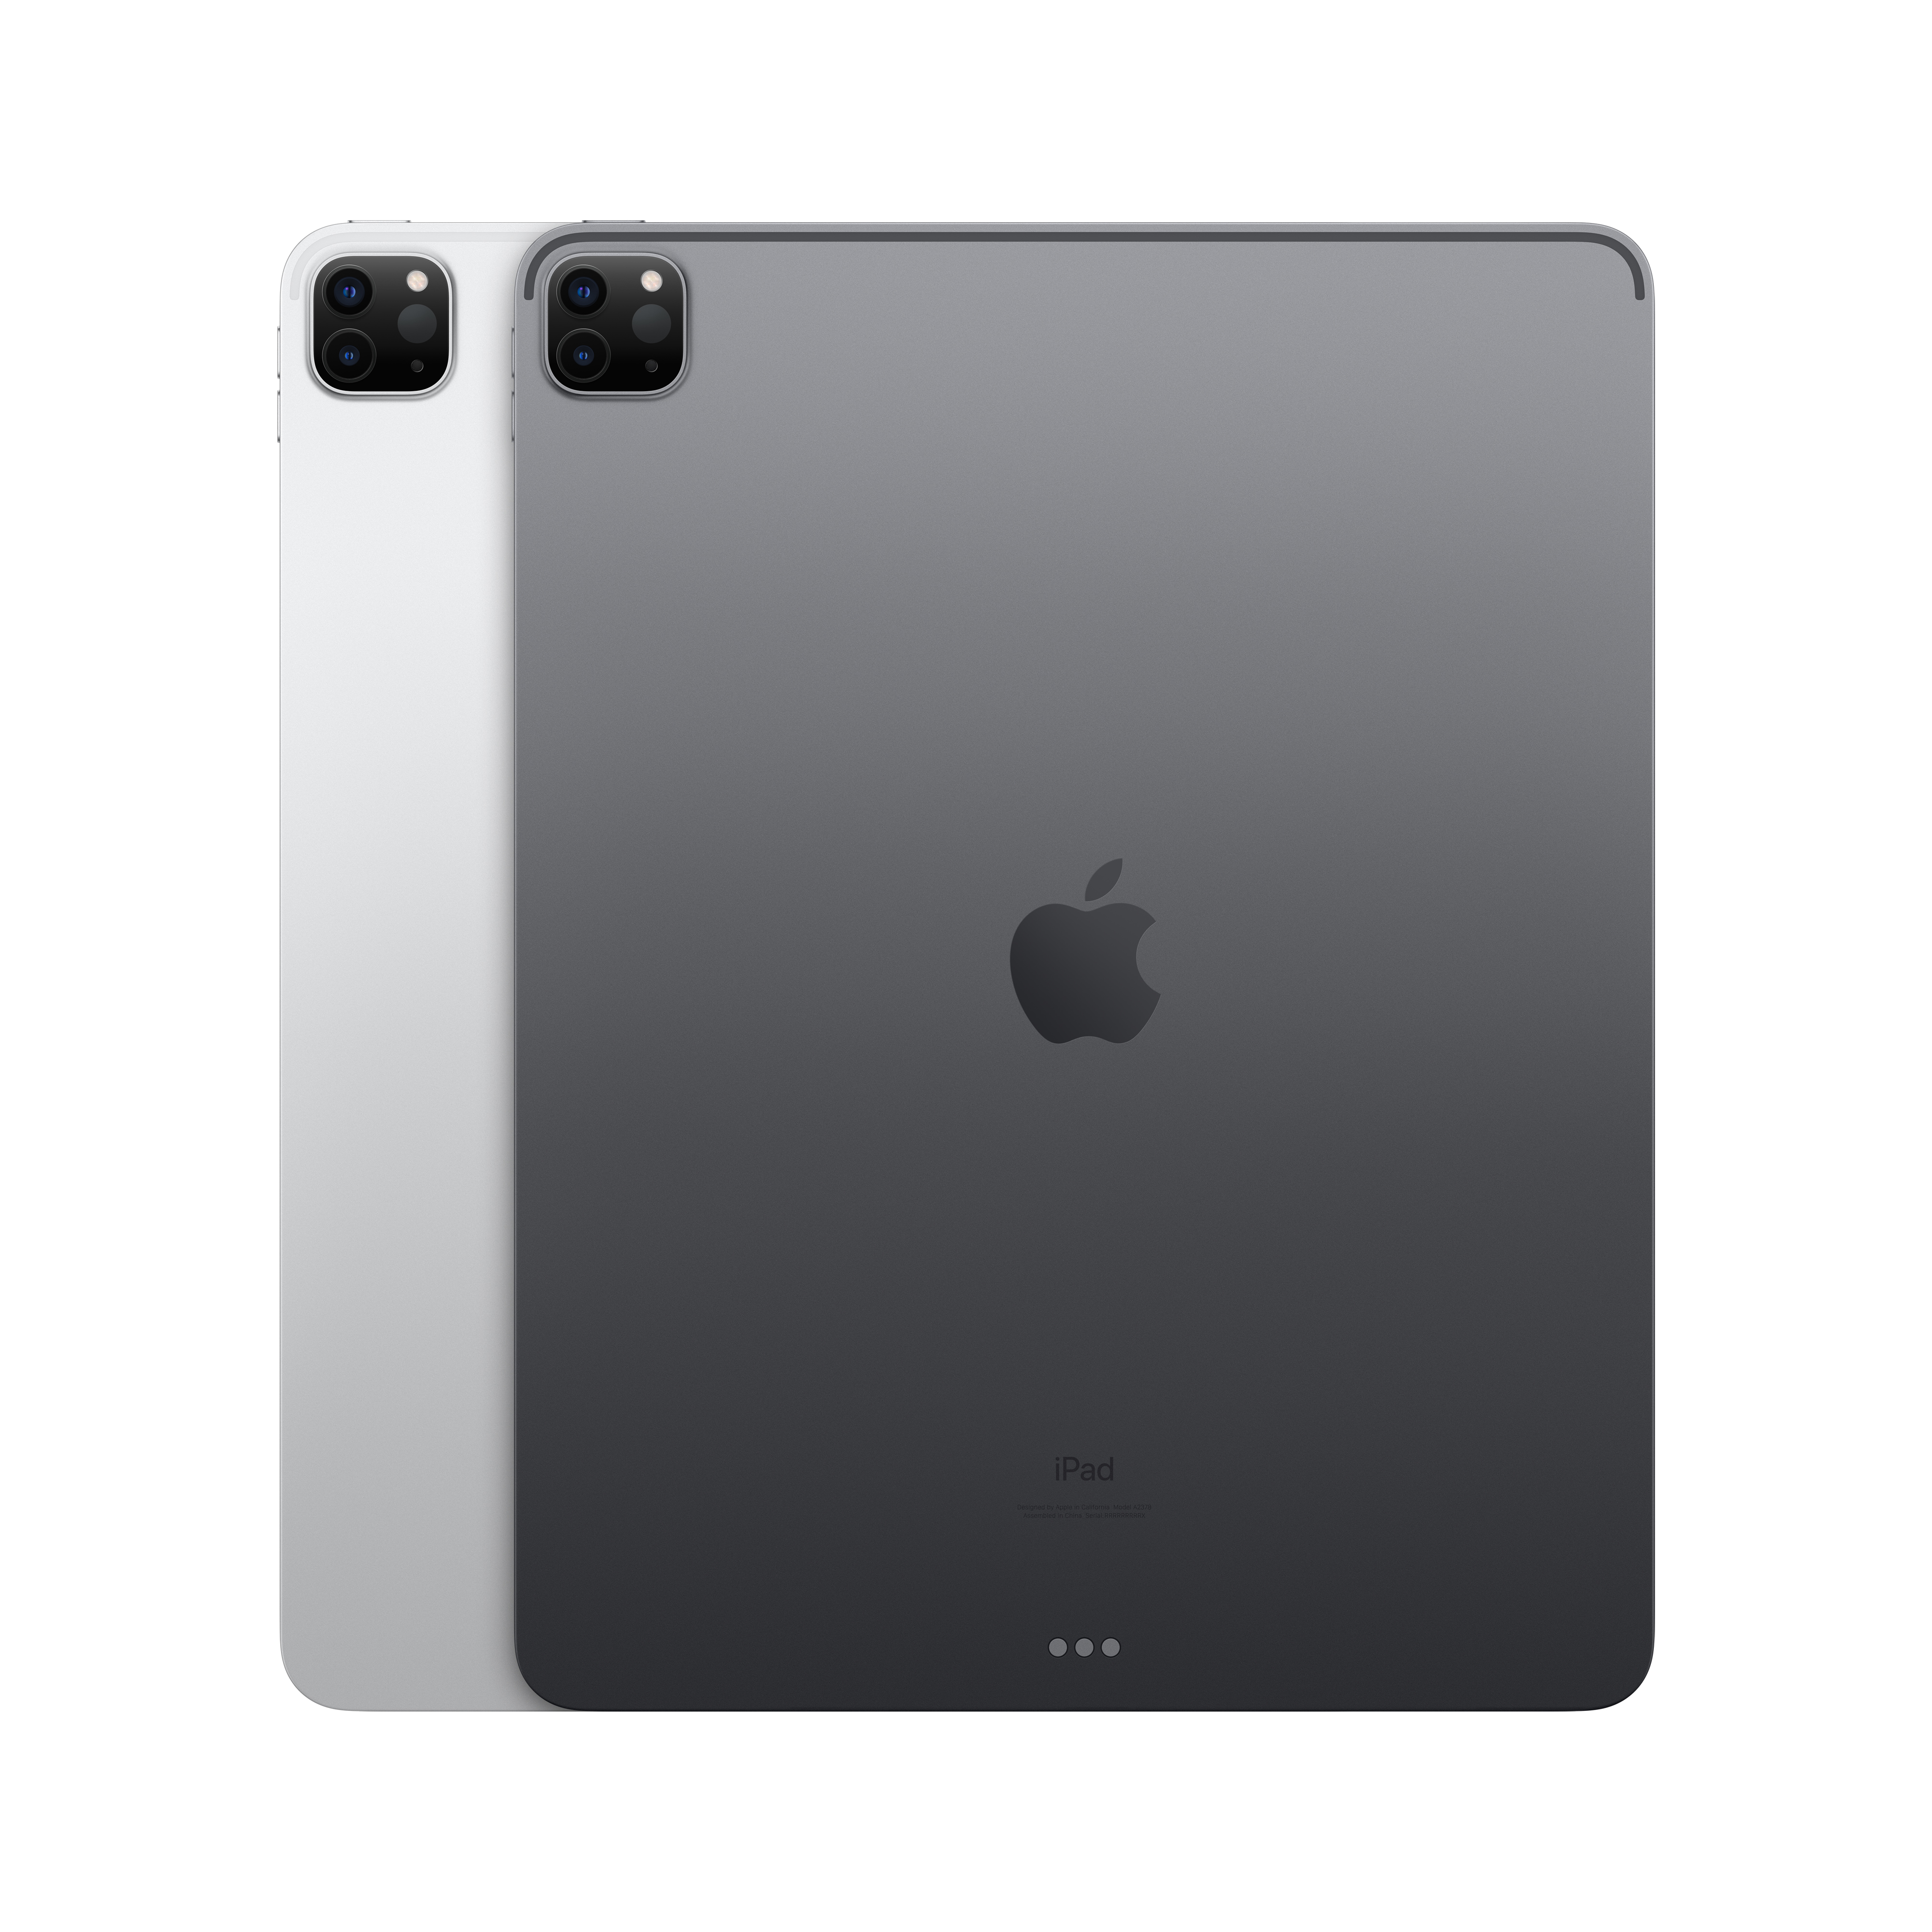 2021 Apple 12.9-inch iPad Pro Wi-Fi + Cellular 256GB - Space Gray (5th Generation) - image 3 of 9